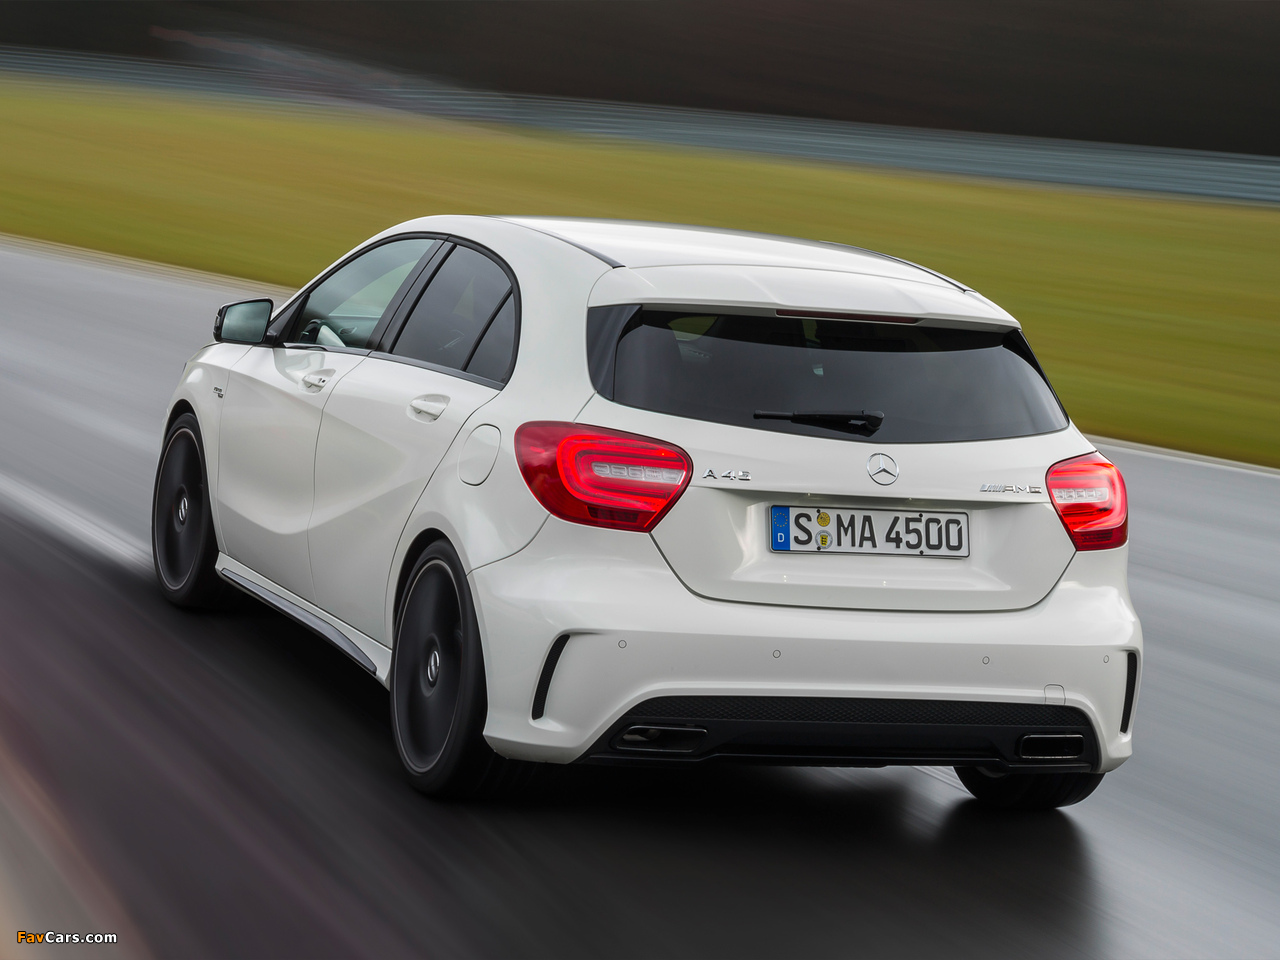 Mercedes-Benz A 45 AMG (W176) 2013 pictures (1280 x 960)